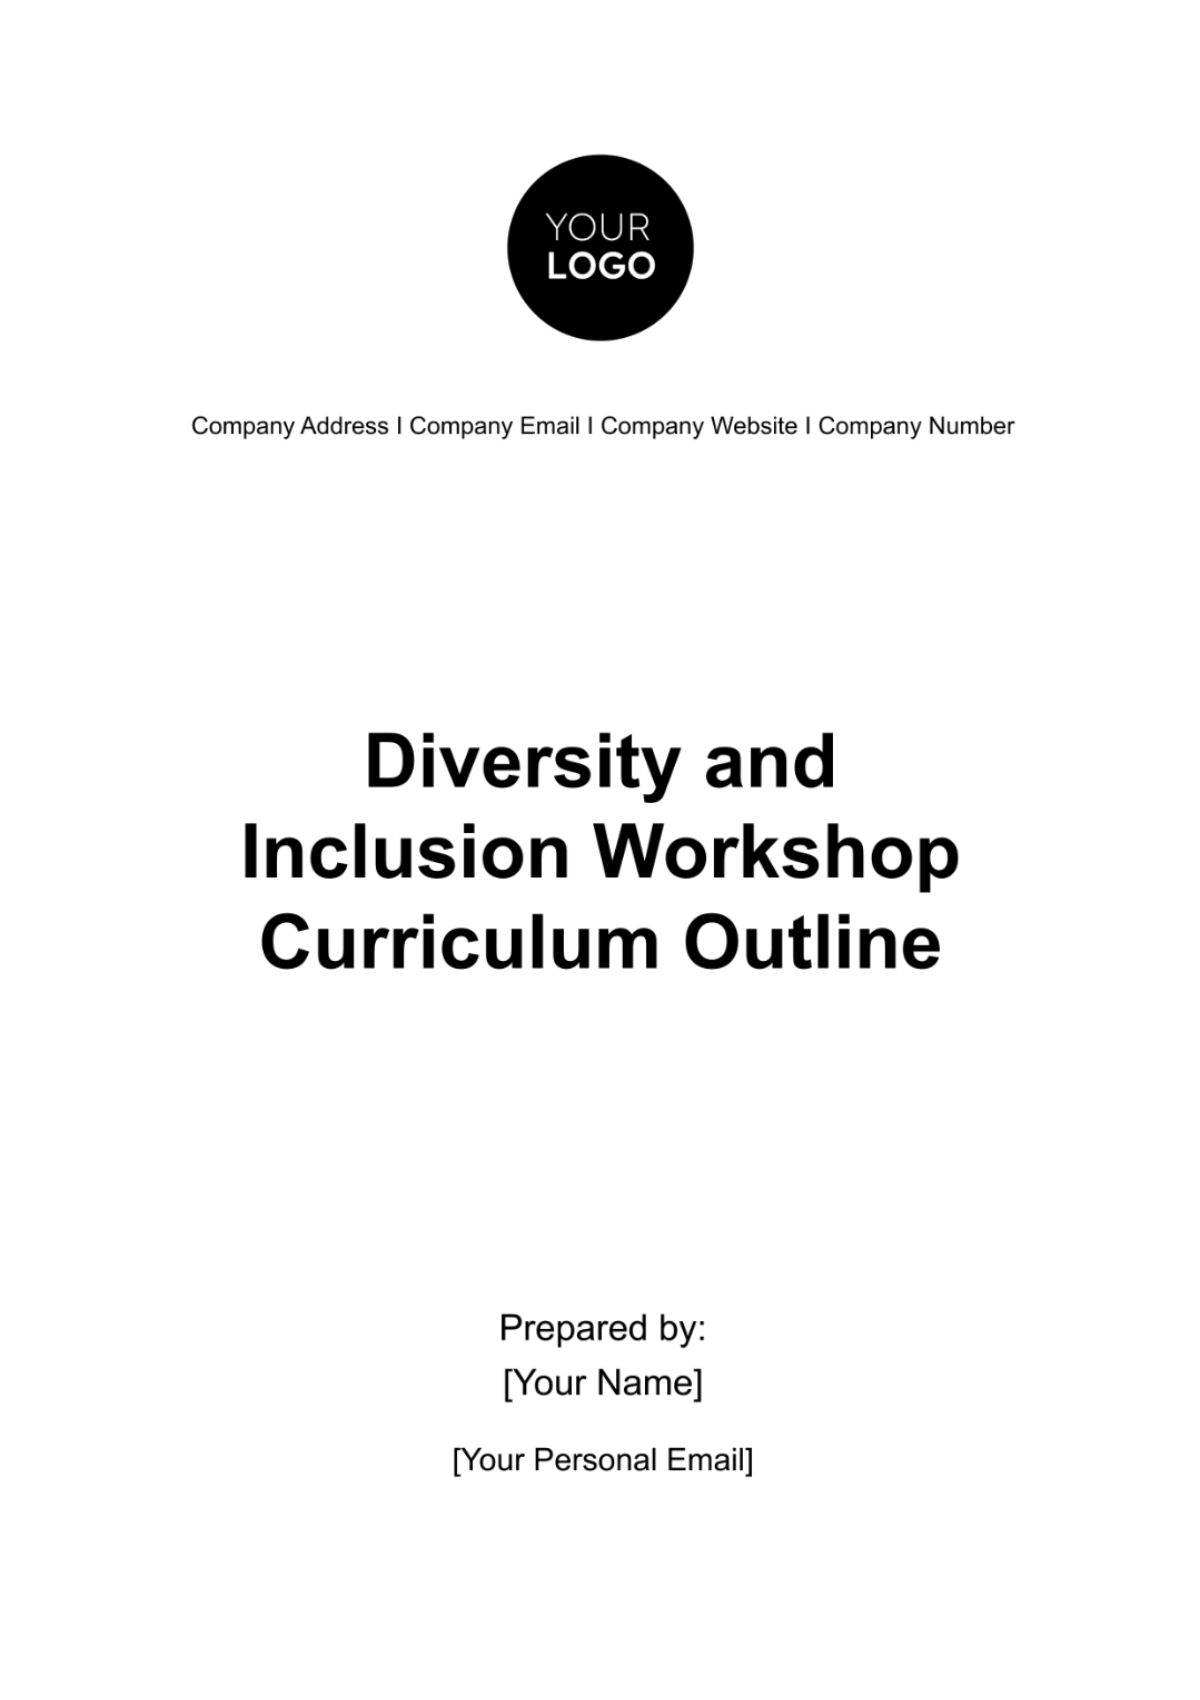 Diversity and Inclusion Workshop Curriculum Outline HR Template